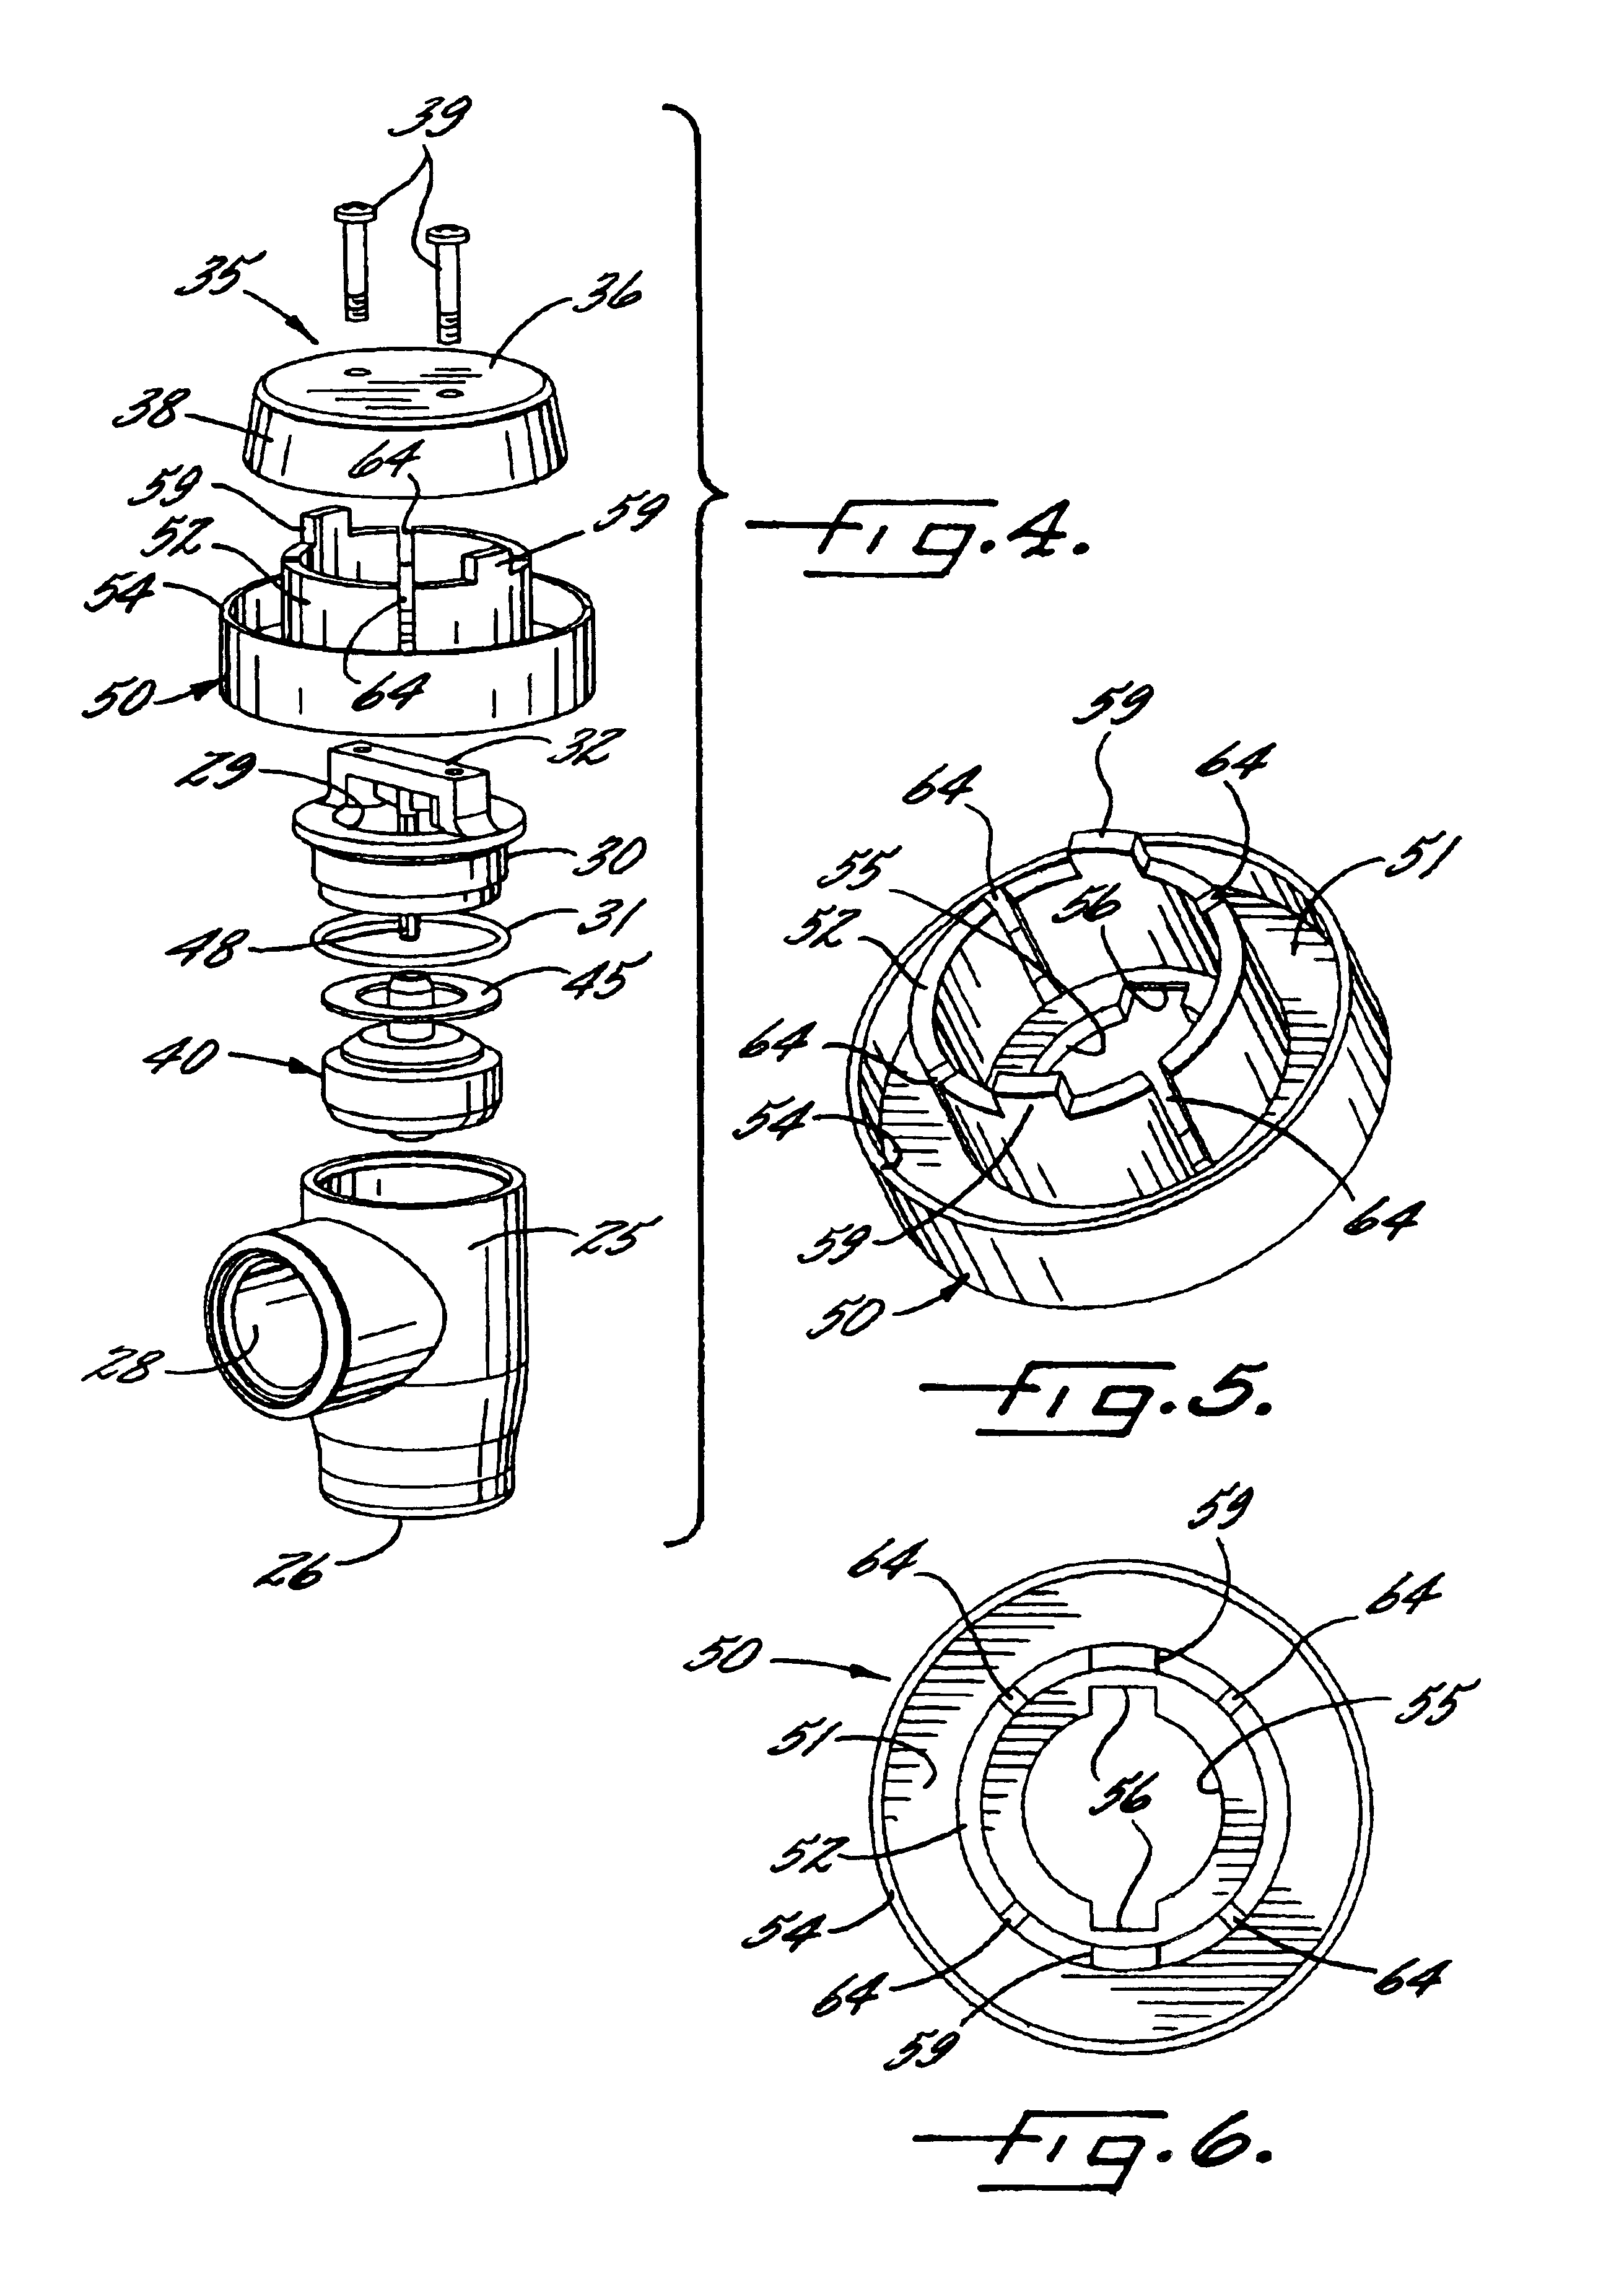 Vacuum breaker with water leak containment device